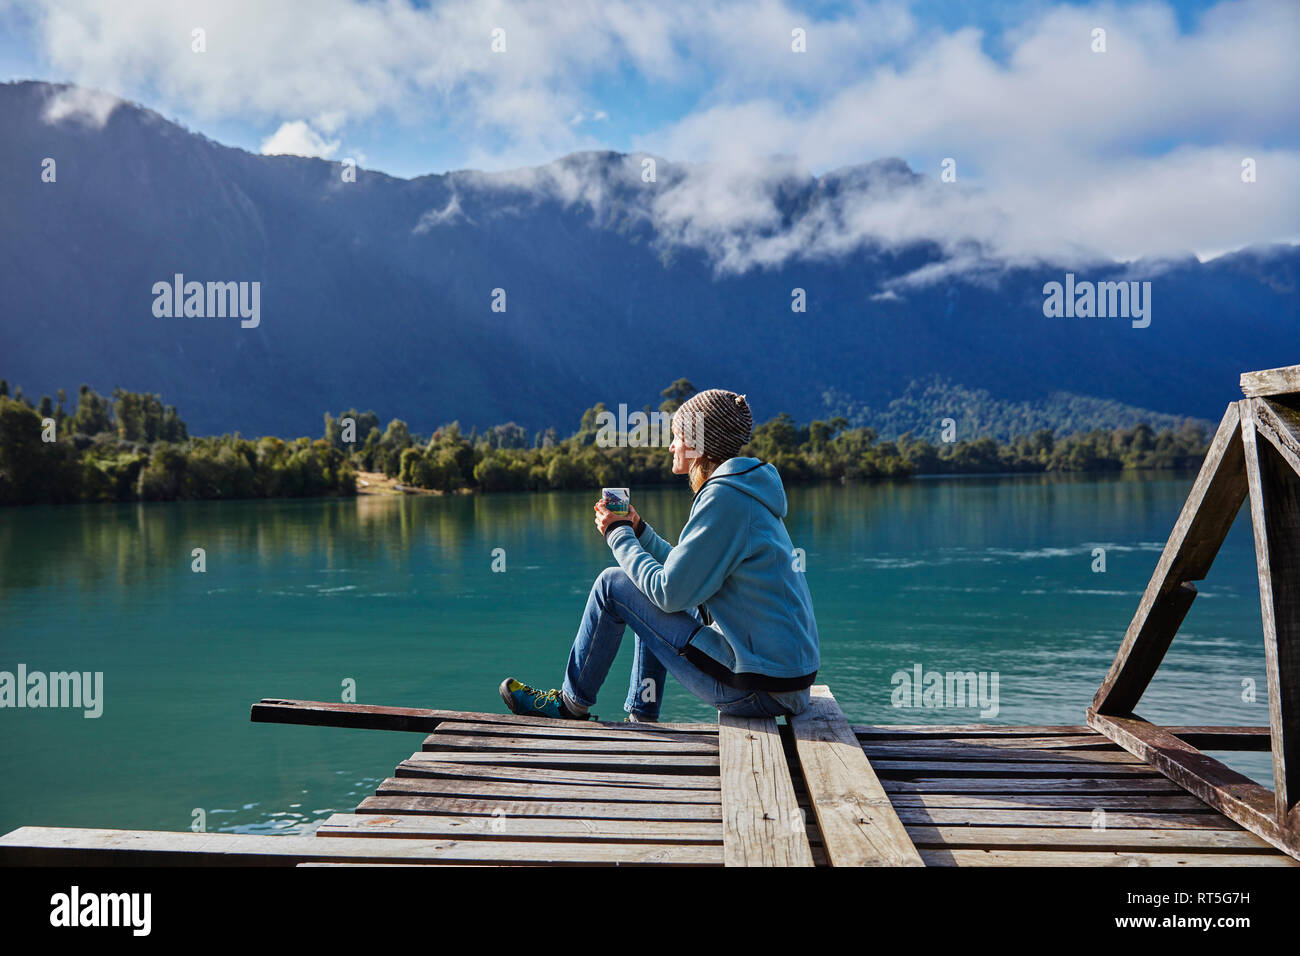 Chili, Lago Rosselot, Chaiten, woman sitting on jetty holding mug Banque D'Images